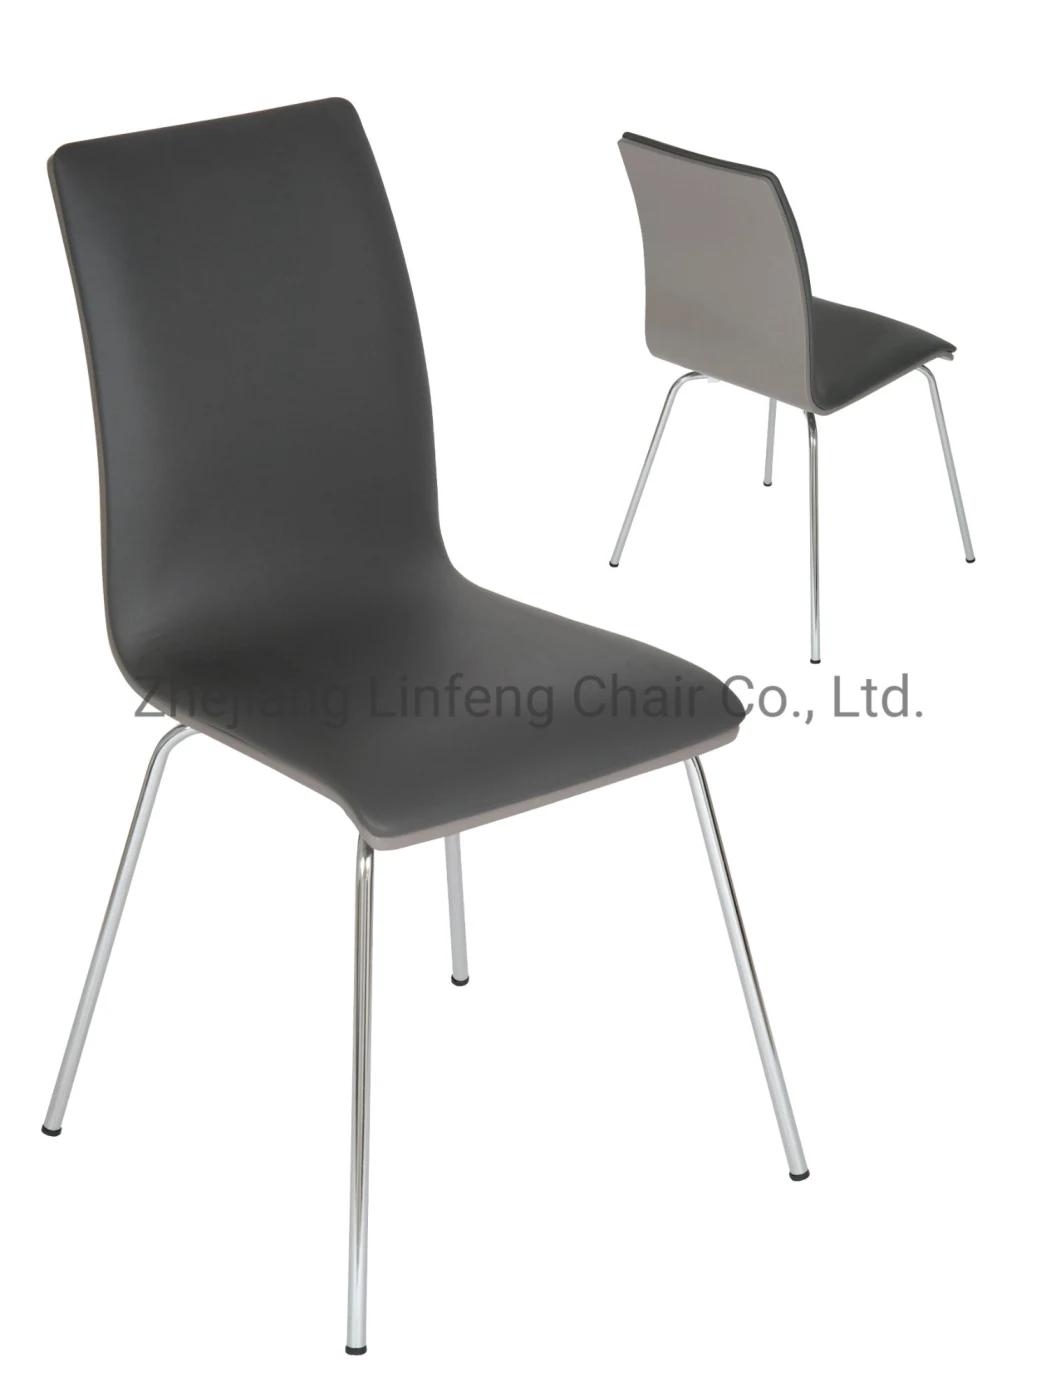 Simple Black Leather Bentwood High Back Metal Legs Dining Chair